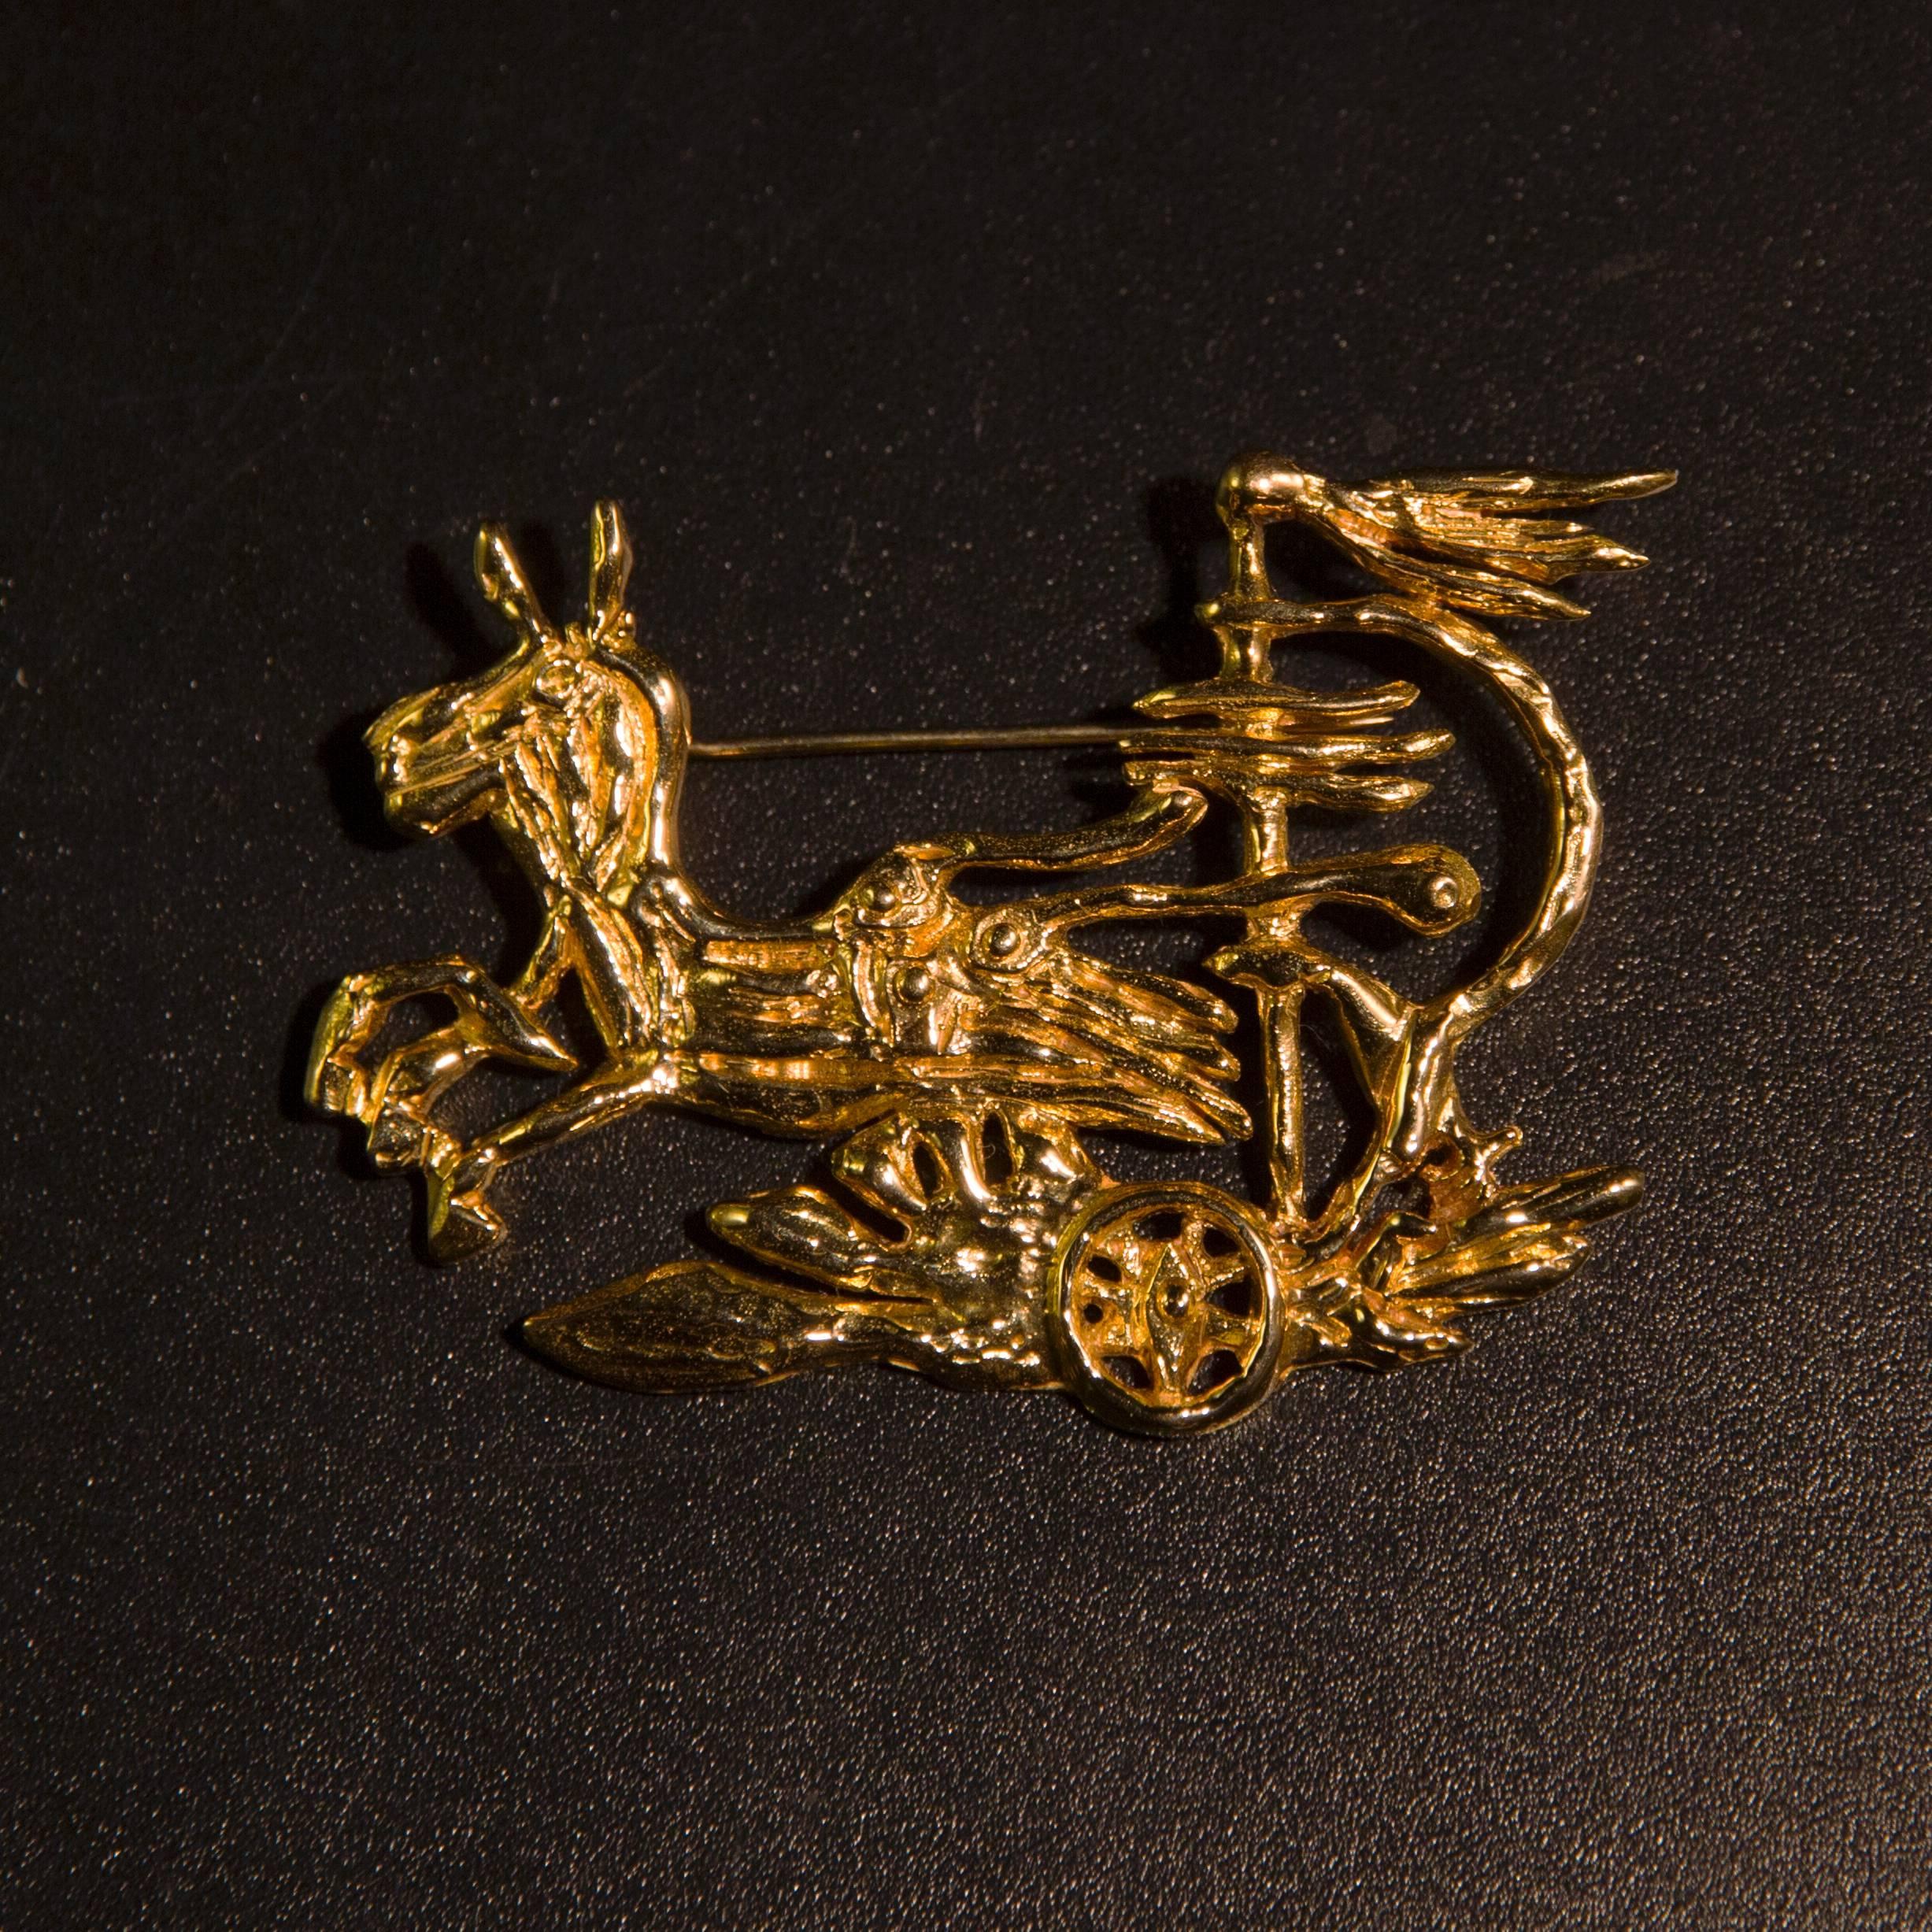 Express Shipping insured during the Lockdown

Beautiful and Rare 18K gold (tested) brooch by Georges Braque (1882-1963), inventor of cubism.
This brooch features Medea leaving on her Chariot.
It is Signed 